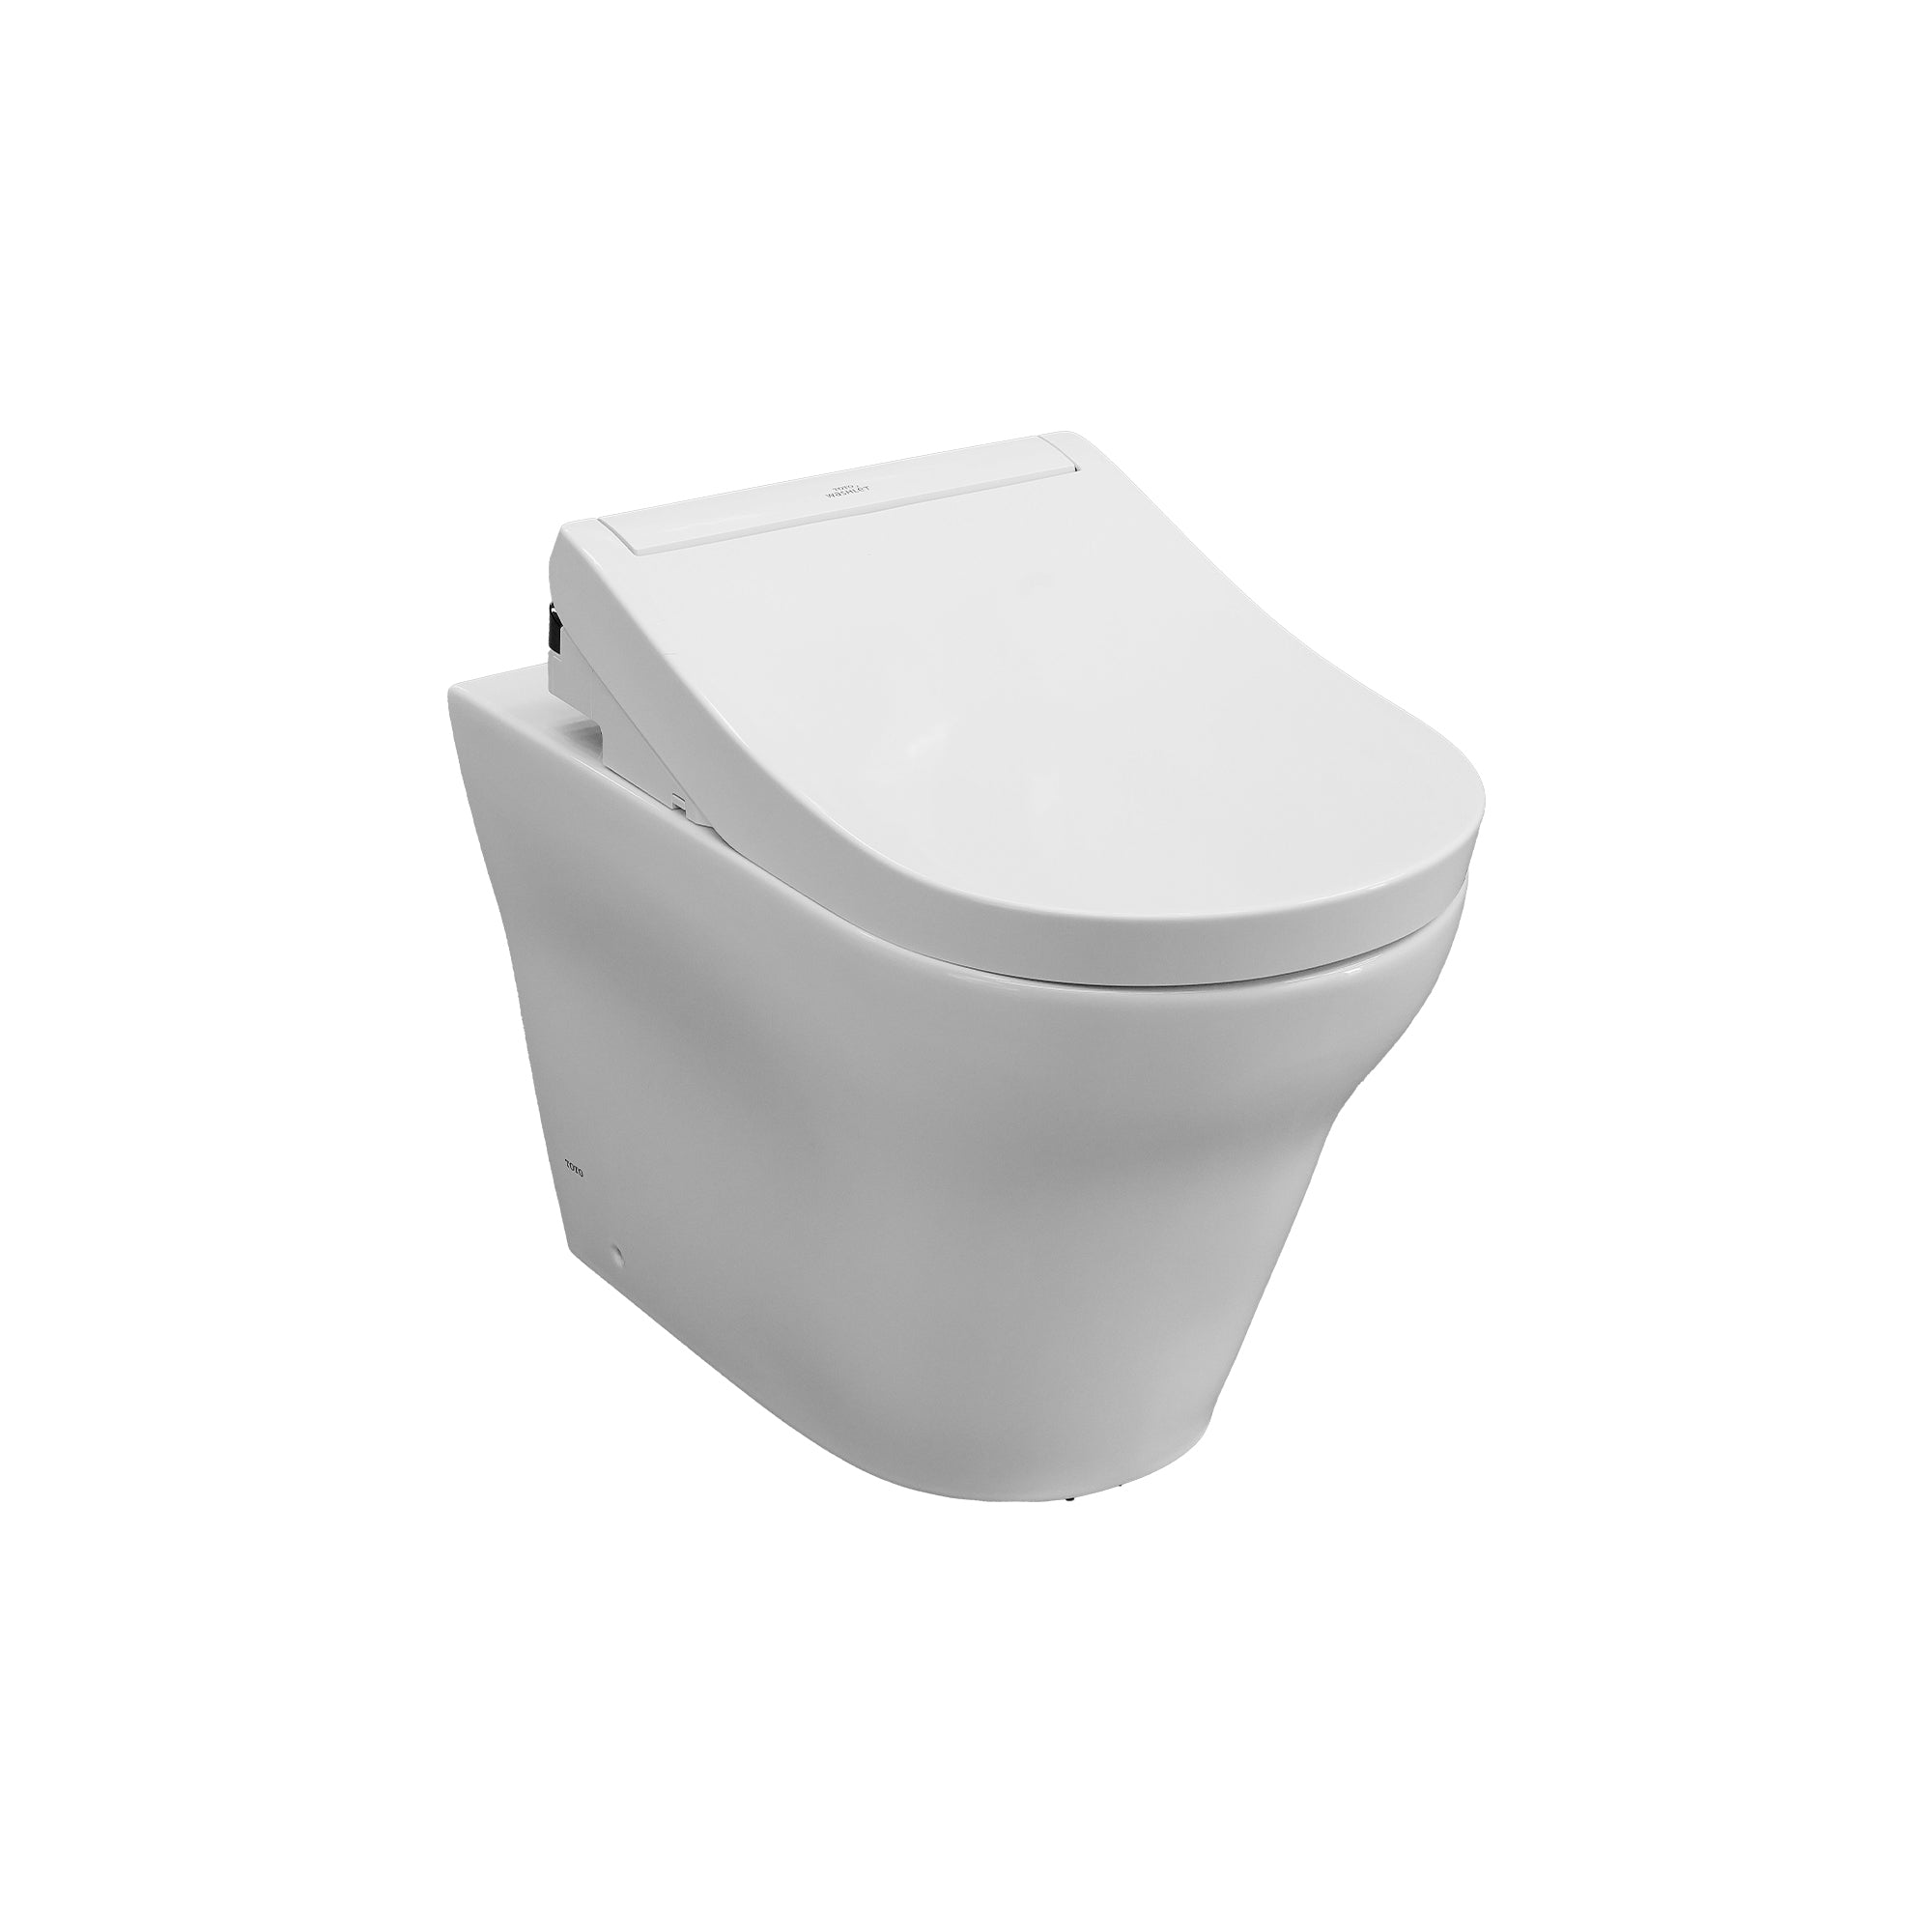 TOTO MH WALL FACED TOILET AND S5 WASHLET W/ REMOTE CONTROL PACKAGE D-SHAPED GLOSS WHITE